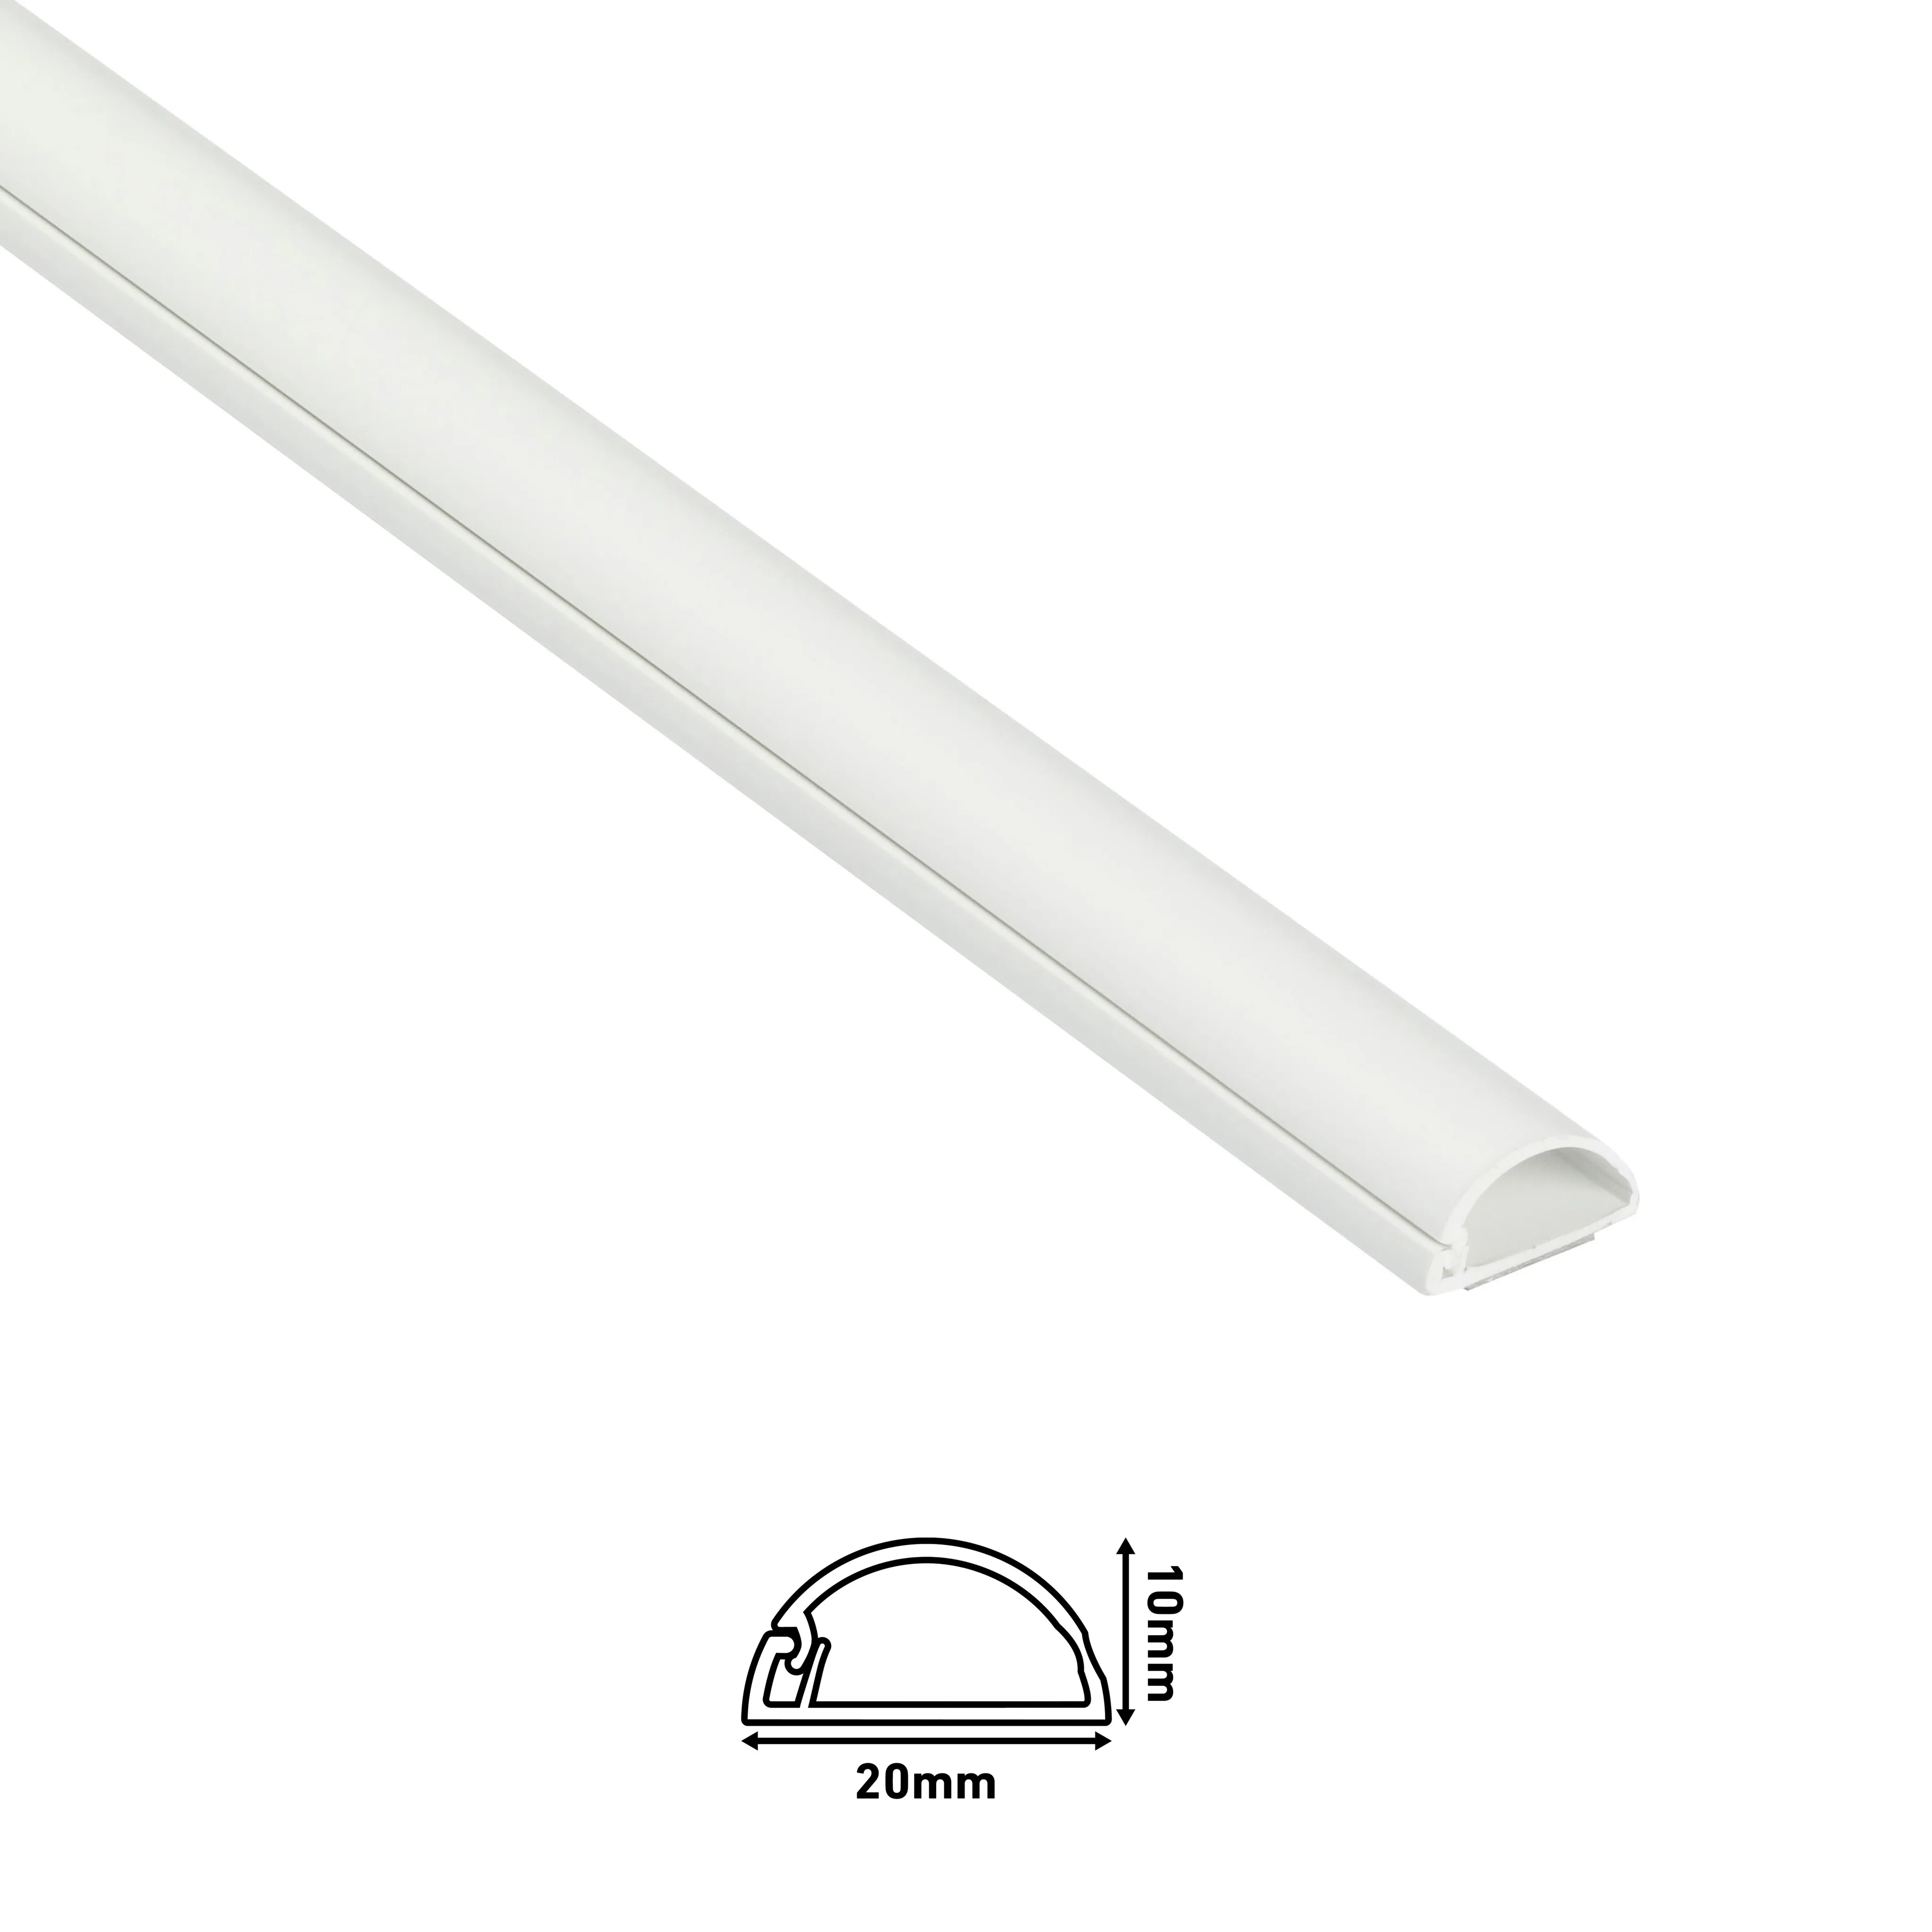 D-Line White Semi-circle Decorative trunking,(W)20mm (L)2m (H)10mm, Pack of 4